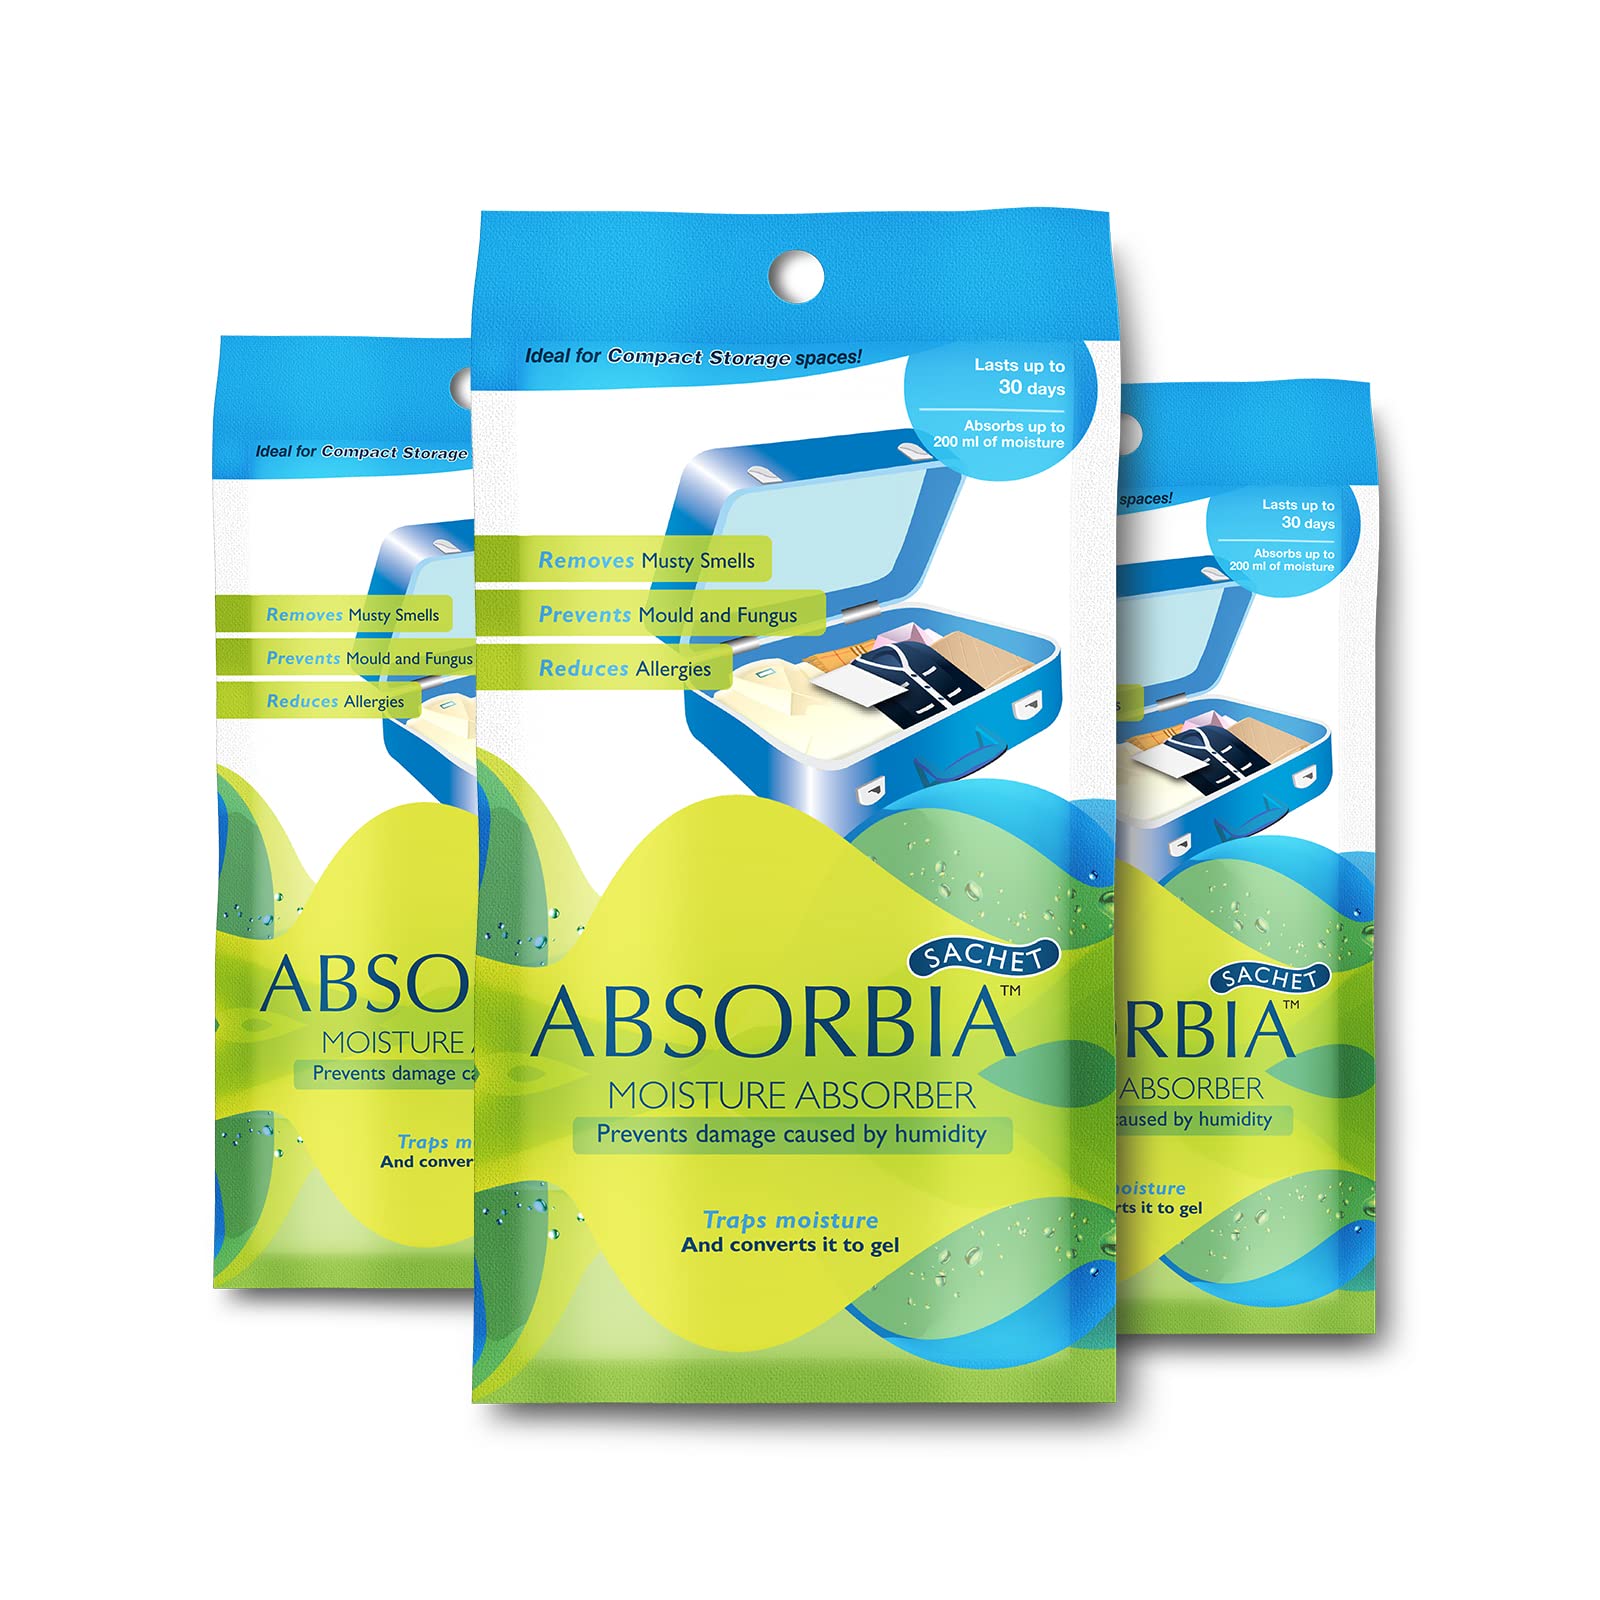 Absorbia Moisture Absorber | Absorbia Sachet - Pack of 3 (200ml Each) & ABSORBIA IONIC HAUS Pure Activated Charcoal Air Purifyer, made with Organic Jute Bag 200 Gms